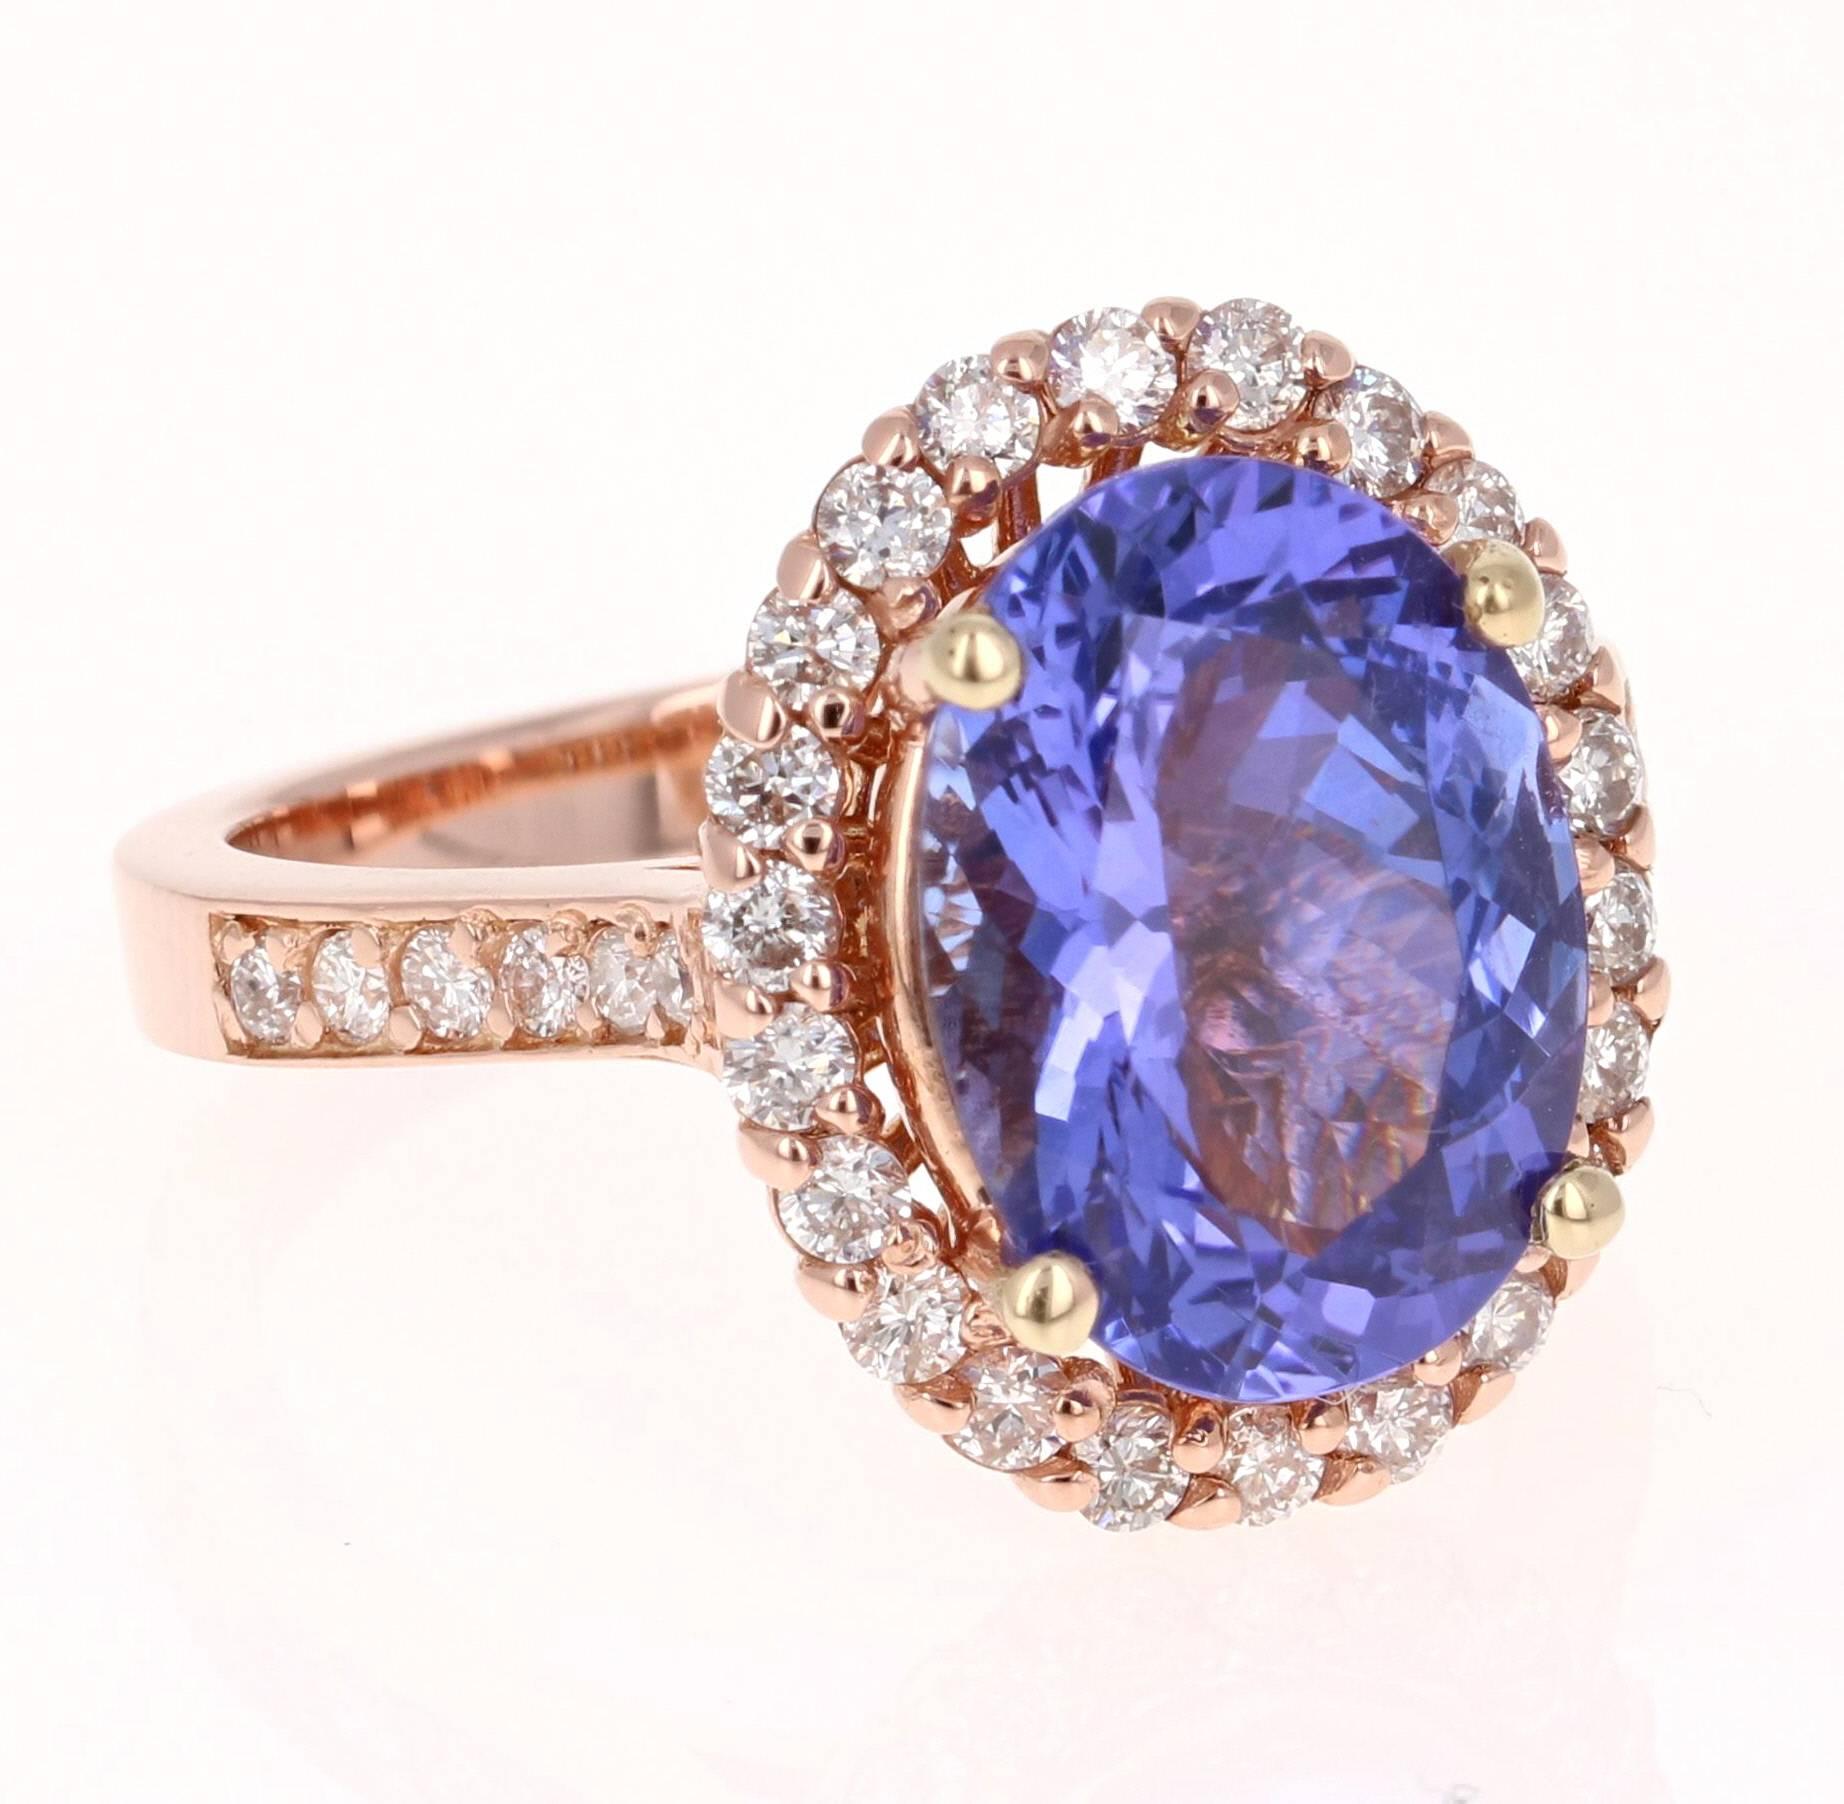 This gorgeous Tanzanite Diamond Ring has a 4.72 Carat Oval Cut Tanzanite as its center stone and has a halo of 34 Round Cut Diamonds that weigh 0.66 Carats. The Clarity of the Diamonds are SI and Color is F. The victorian inspired setting gives the